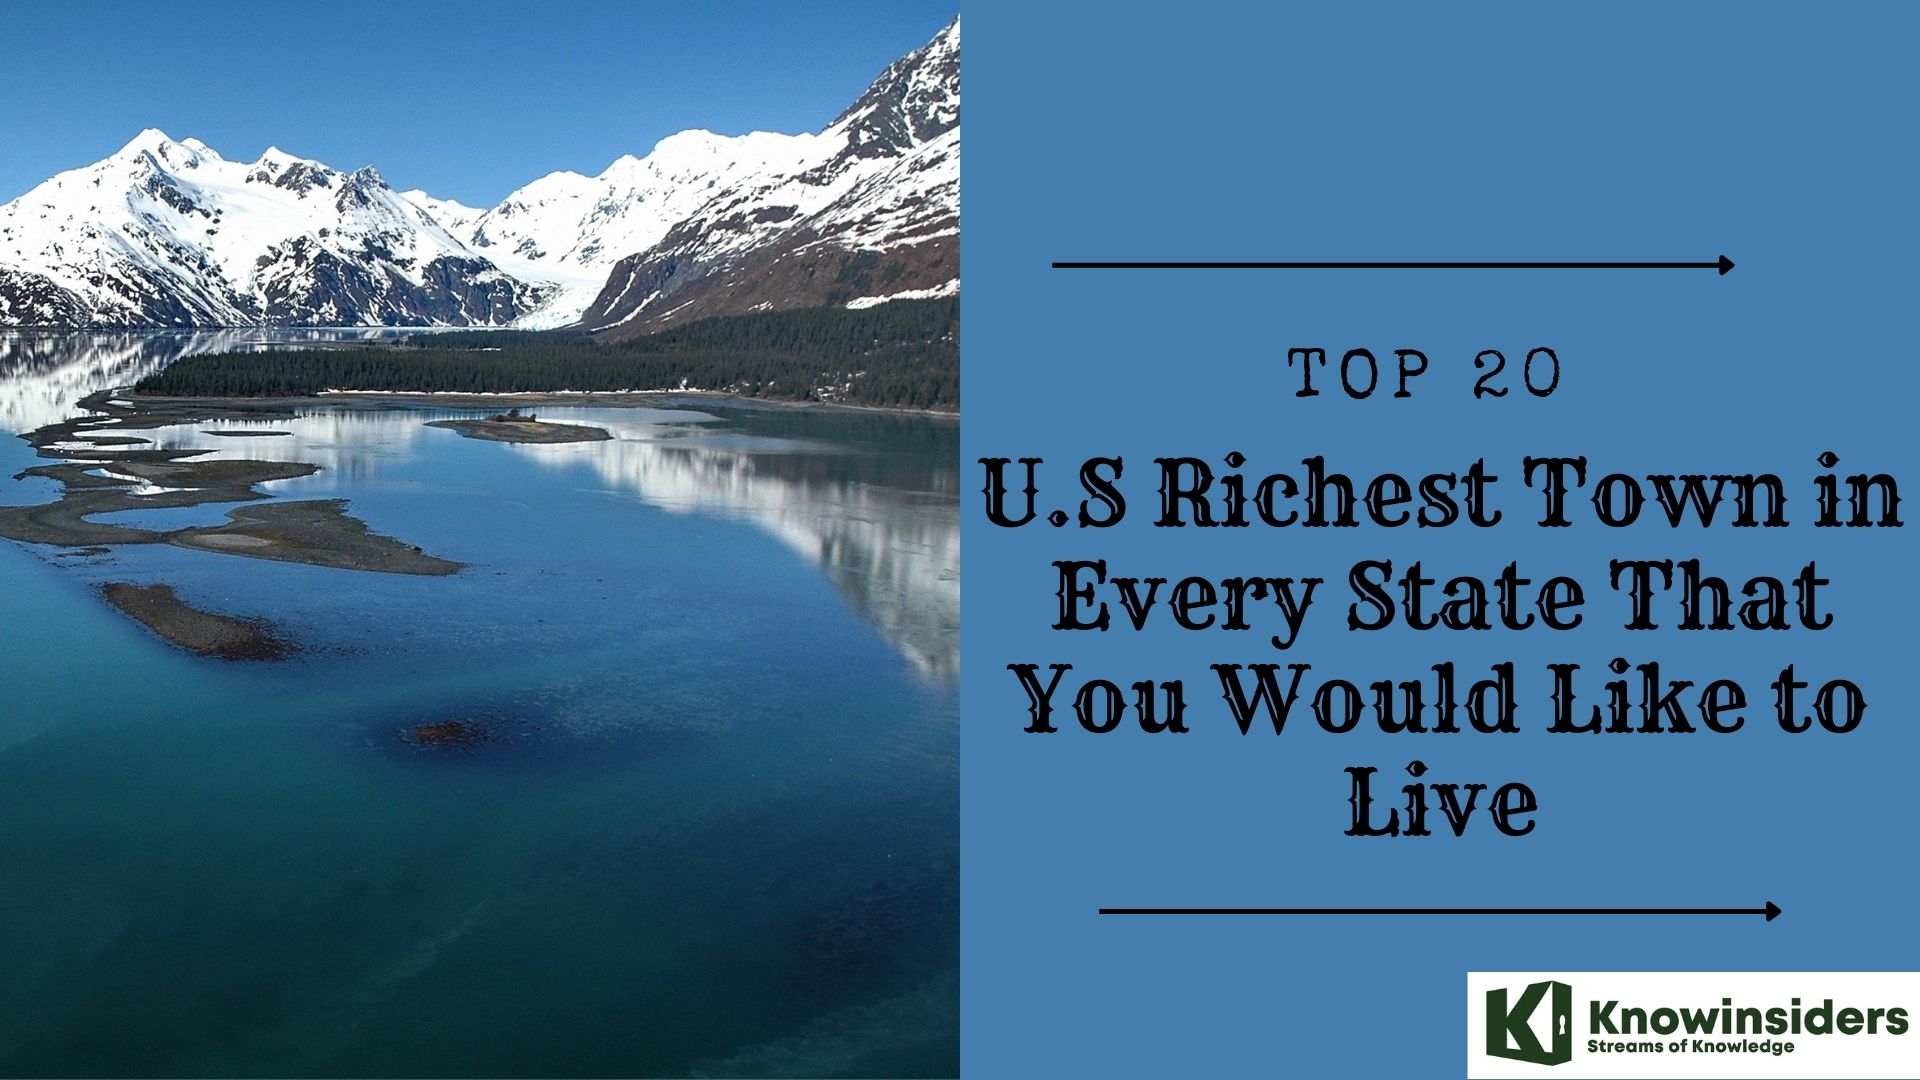 Top 20 U.S Richest Town in Every State That You Would Like to Live In